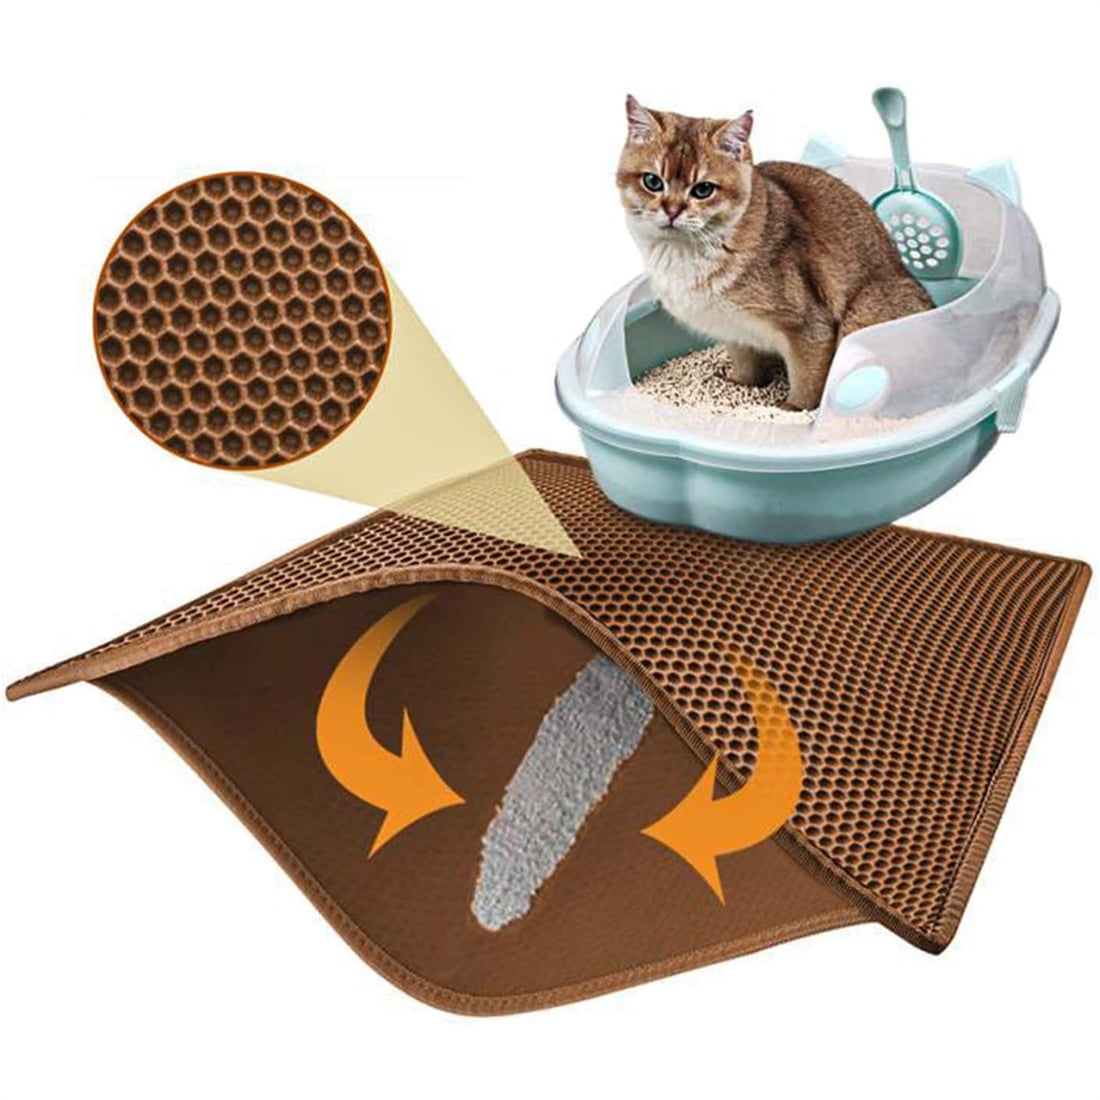 Pefilos Foldable Large Double Layer Cat Litter Trapping Mat with Handles,30 inch x 23.6 inch, Grey, Size: 30 x 23.6(Foldable), Black